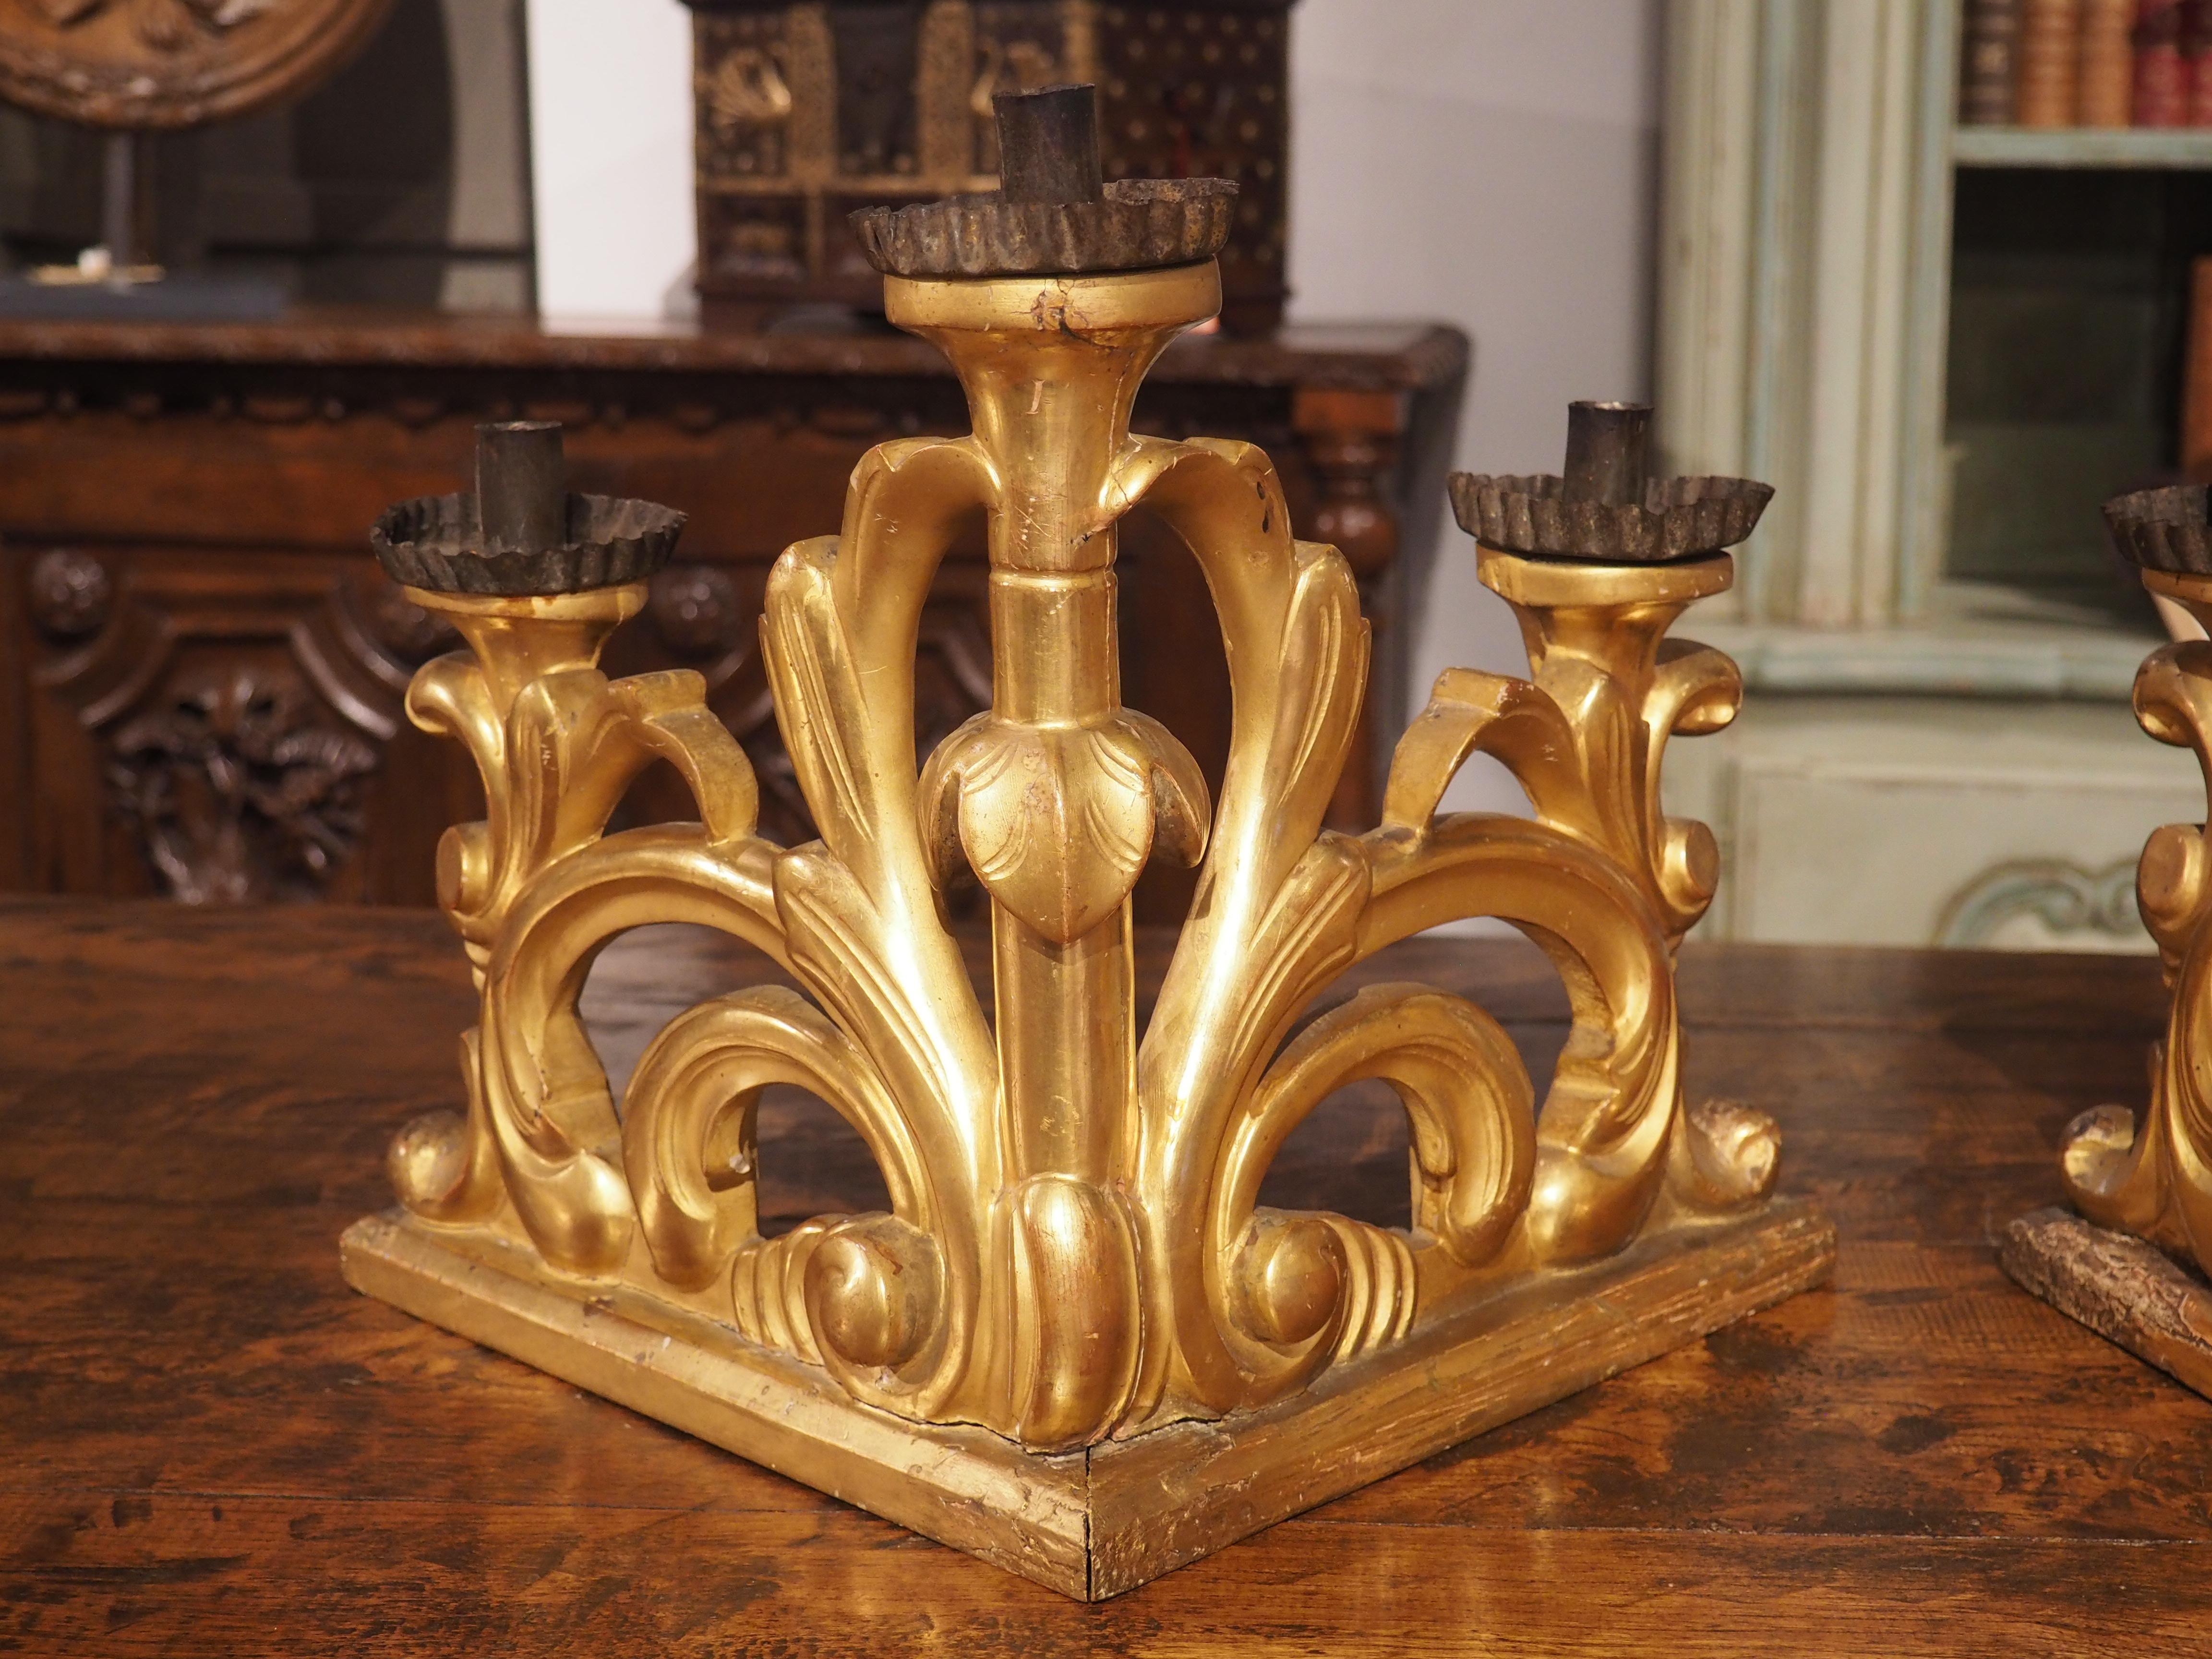 With their right angle bases and descending bobeche display, this pair of Italian giltwood candlesticks make unique light sources. Hand-carved in the late 1700’s, the Baroque period candlesticks feature an elaborate presentation of curled leaves and